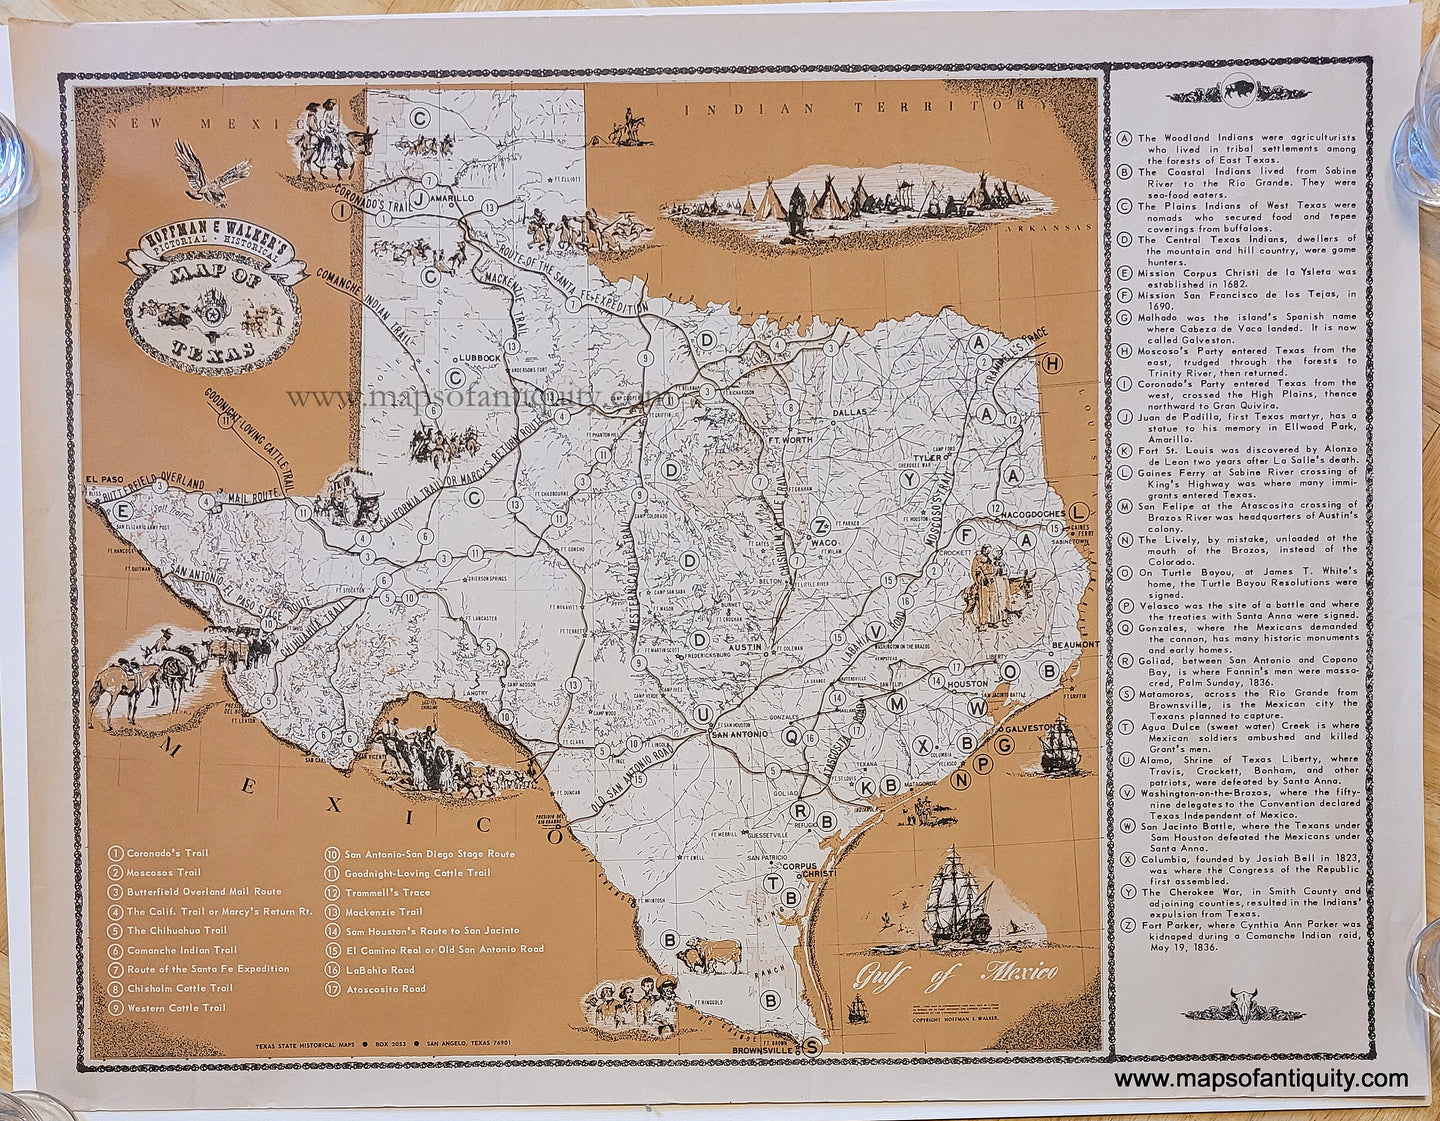 Printed-Color-Pictorial-Map-Hoffman-&-Walker's-Pictorial-Historical-Map-of-Texas-c.-1960-Hoffman-&-Walker-South-Texas-1900s-20th-century-Maps-of-Antiquity